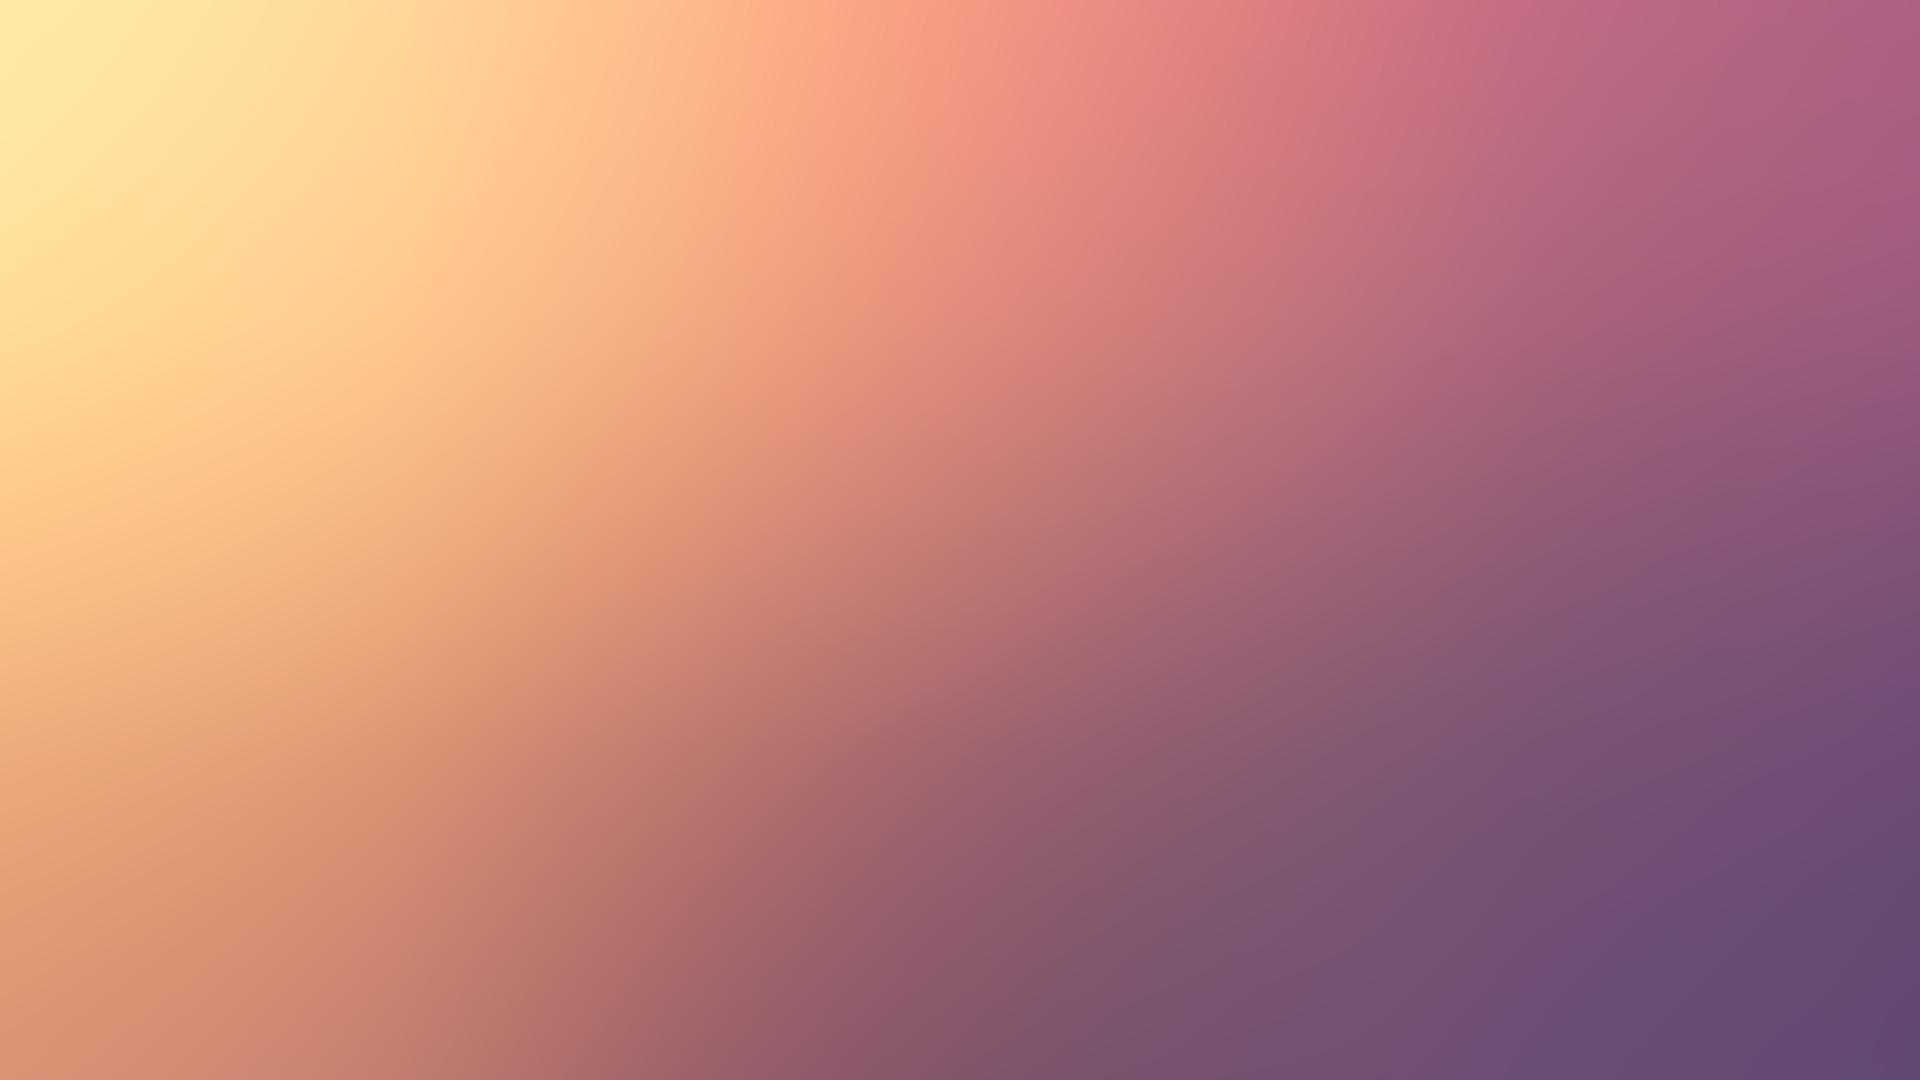 Pastel Colors, Cute and faded, Popular wallpapers, Adorable and charming, 1920x1080 Full HD Desktop